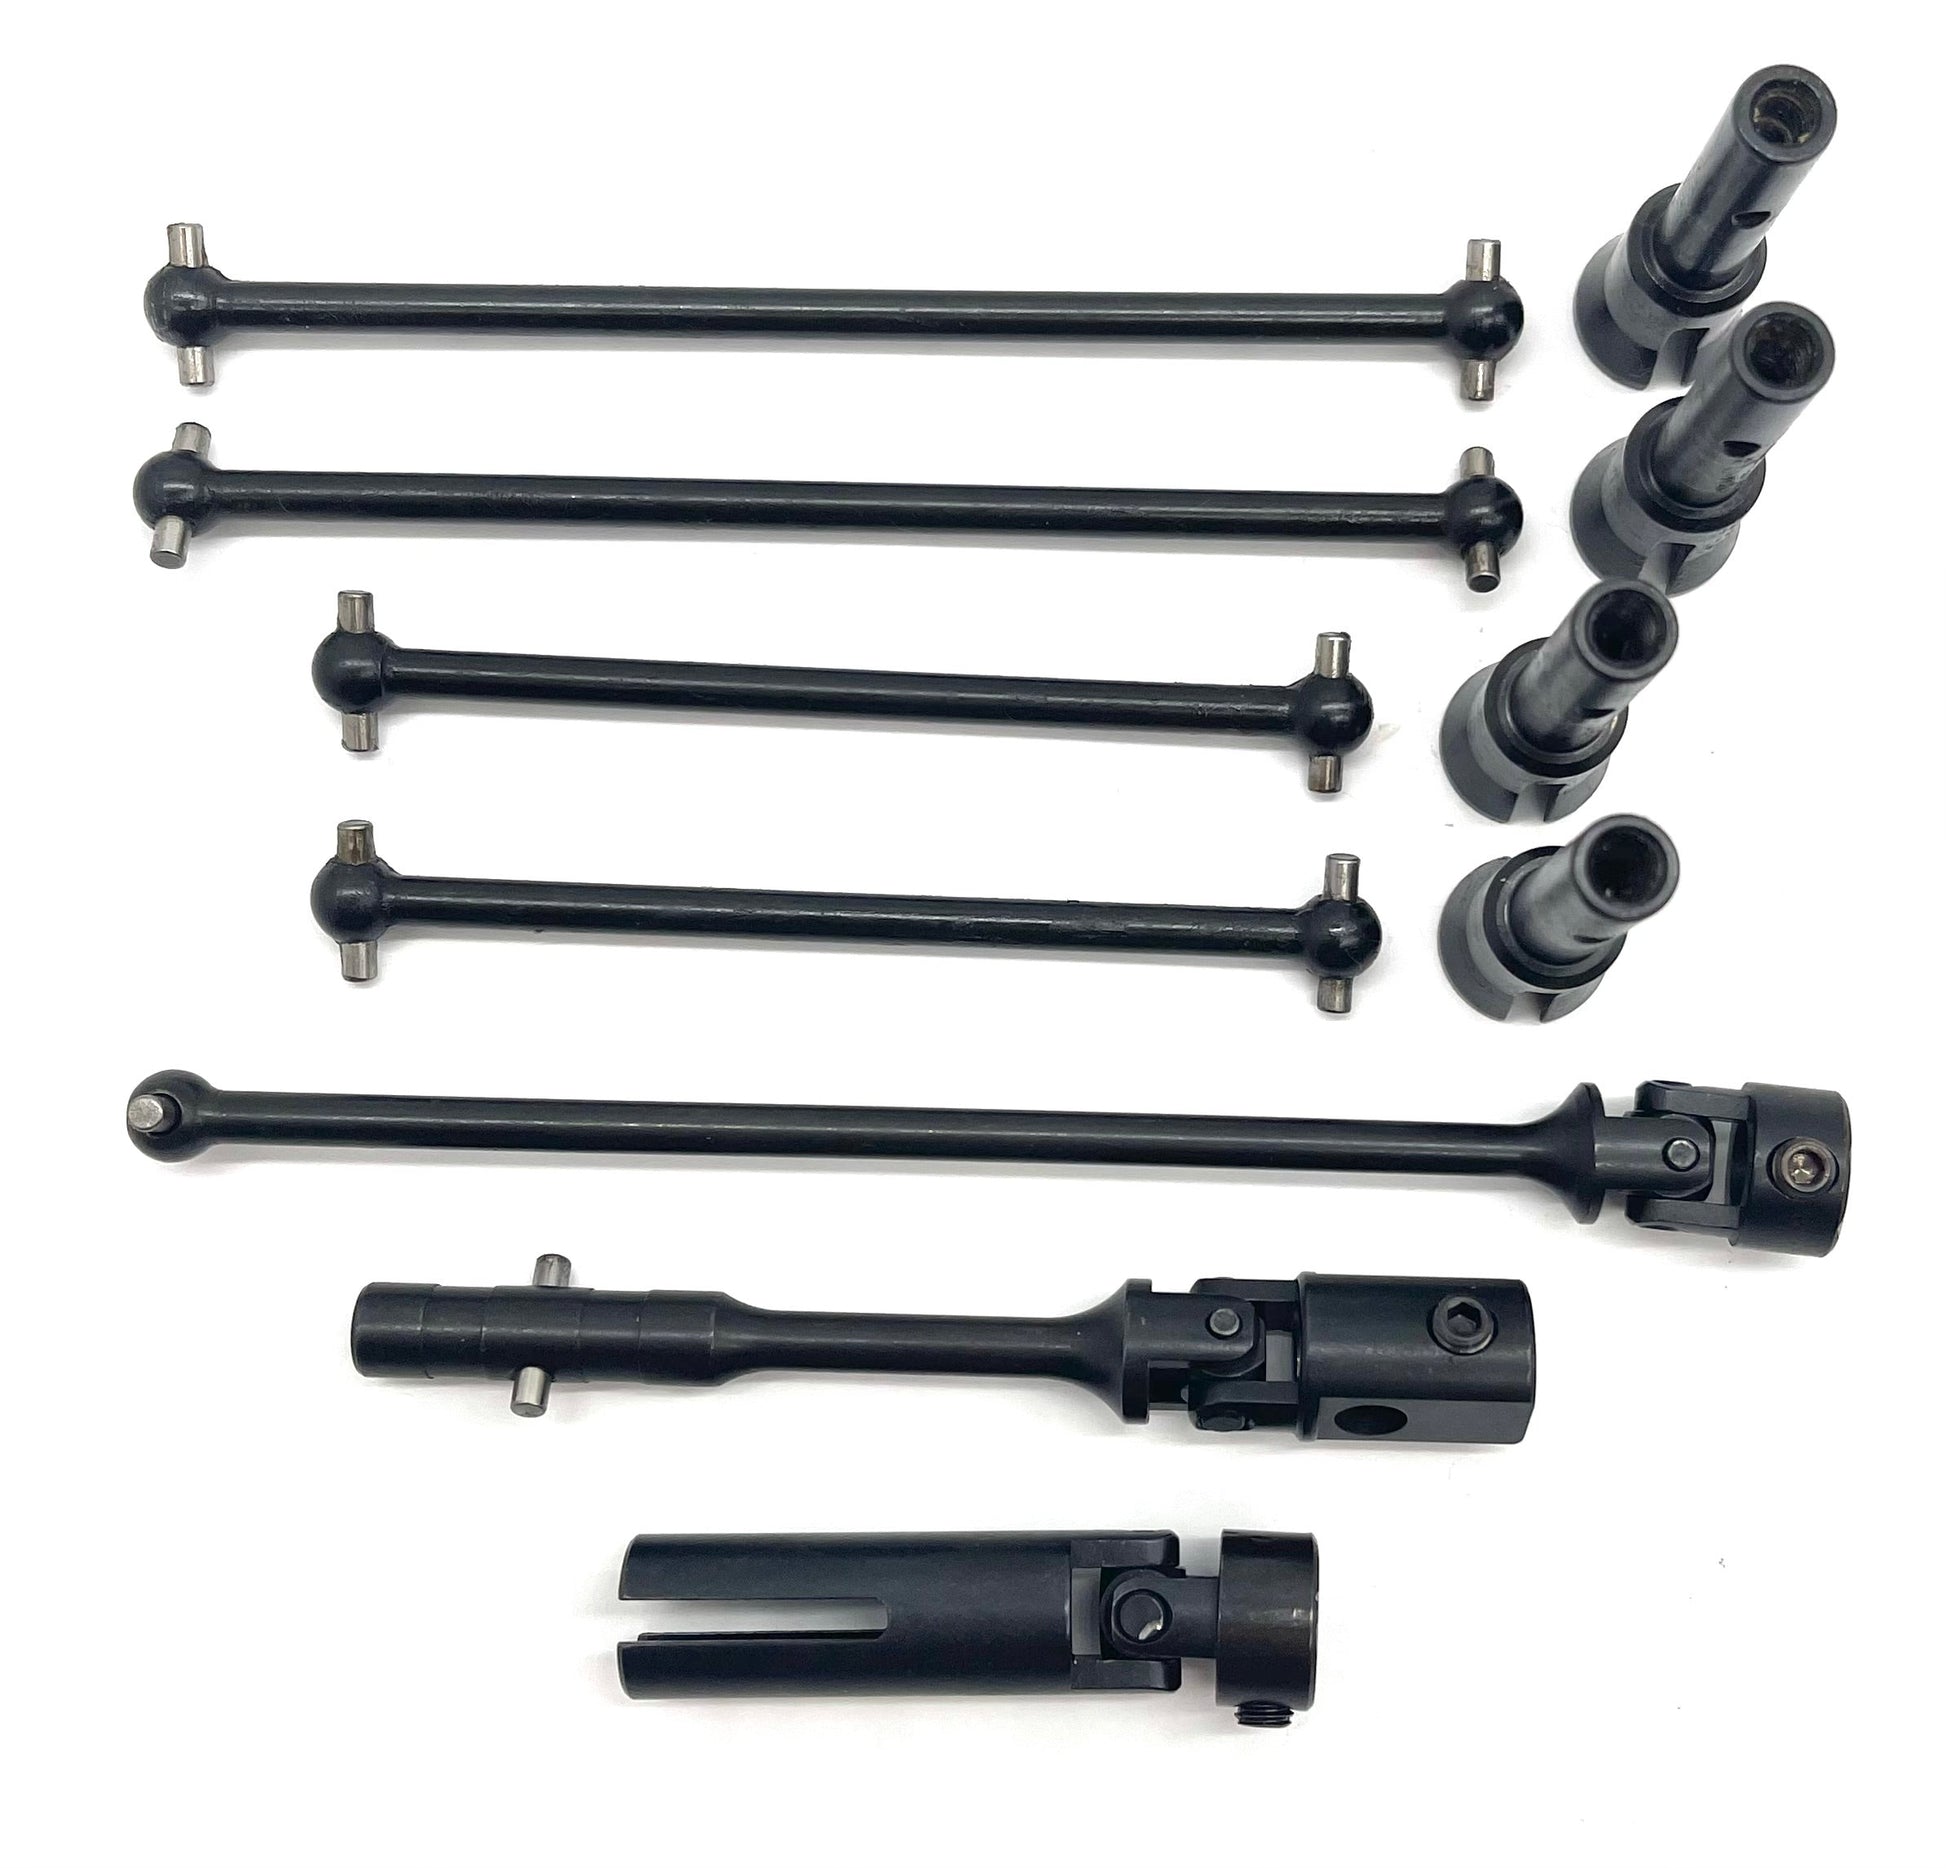 Kyosho USA-1 NITRO AXLES Drive Shafts Swingshafts kyosho KYO33155 - Dirt Cheap RC SAVING YOU MONEY, ONE PART AT A TIME